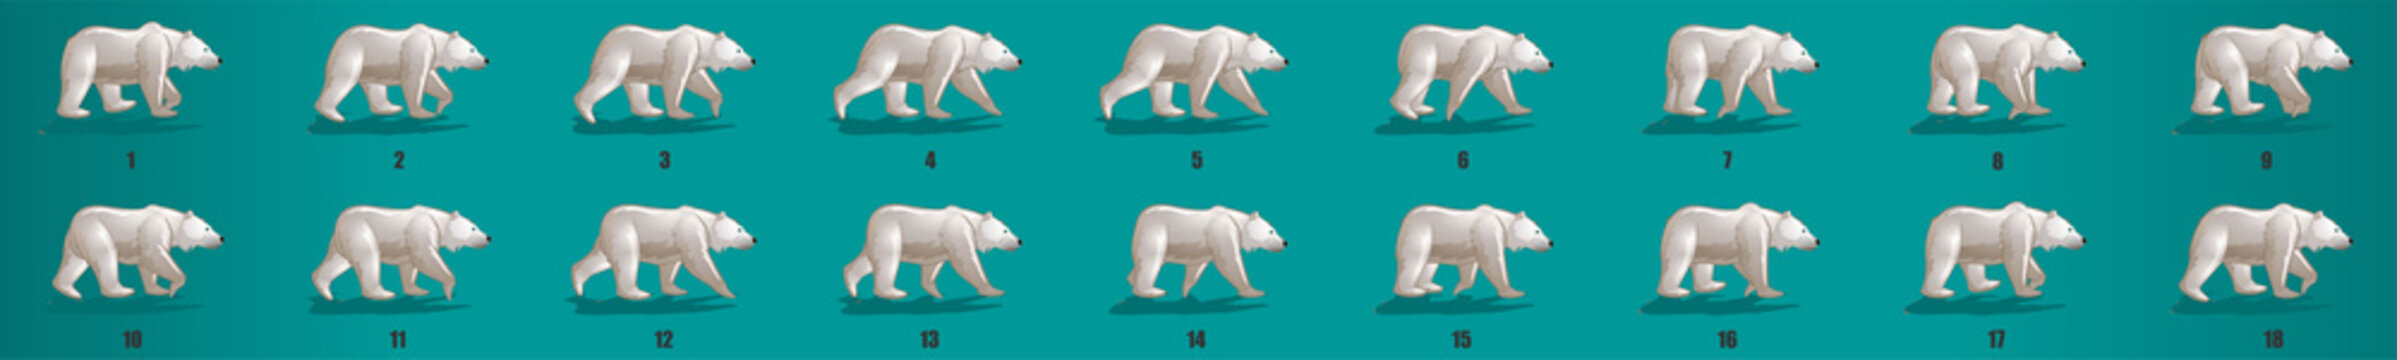 Bear Walk cycle animation frames, loop animation sequence sprite sheet 